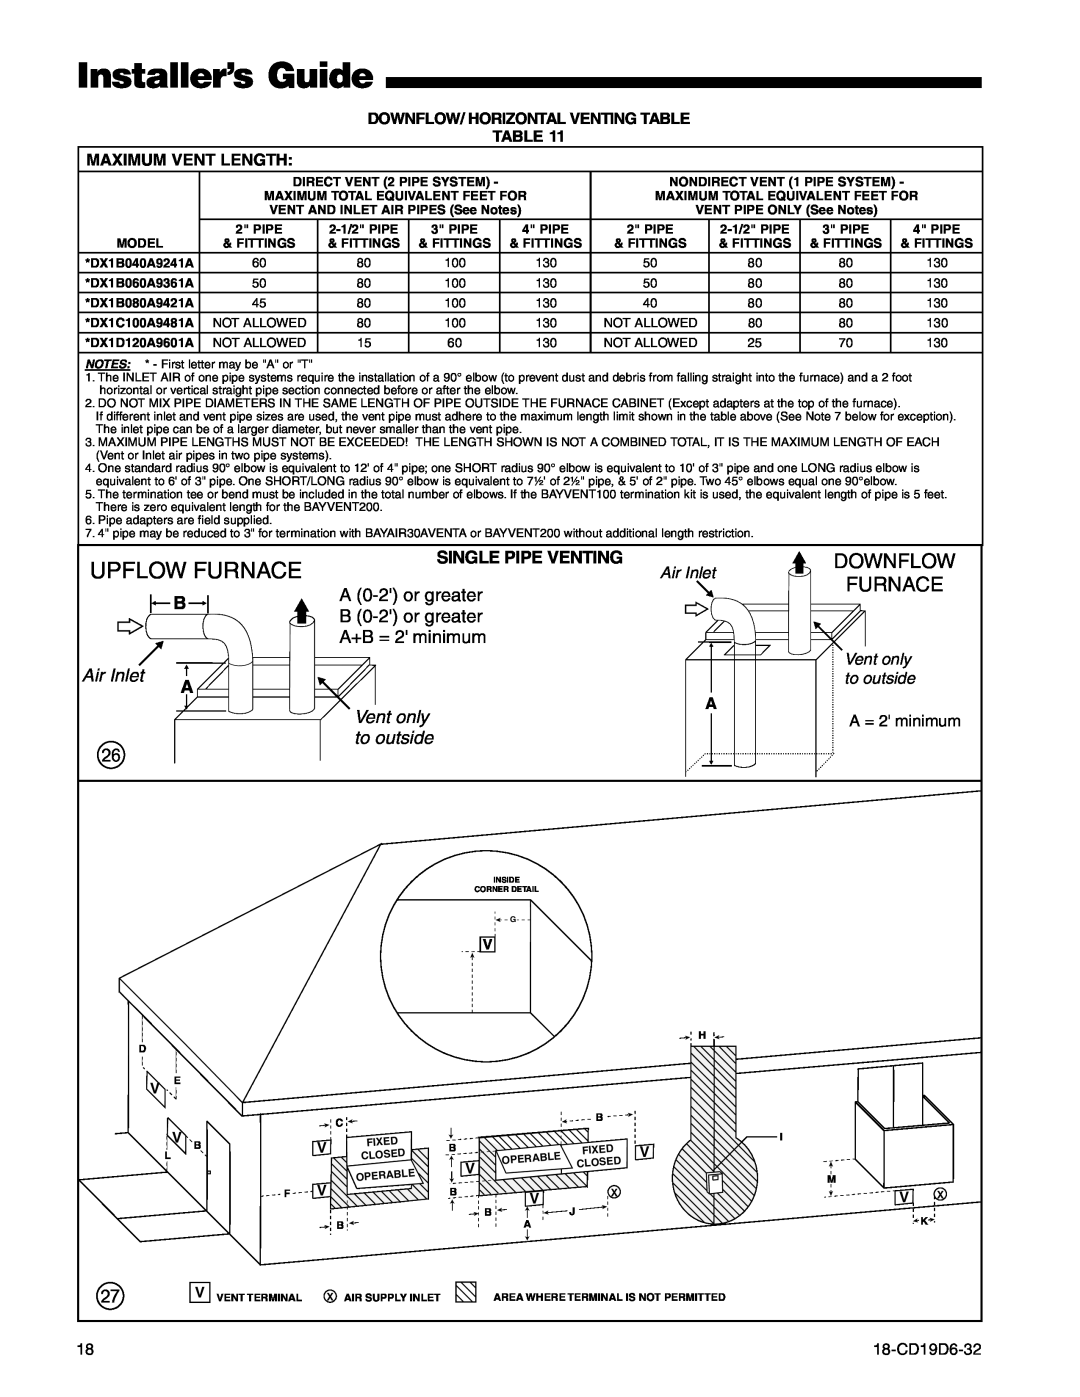 Trane UX1B080A9421A manual Upflow Furnace, Installer’s Guide, Downflow, A 0-2or greater, B 0-2or greater, A+B = 2 minimum 